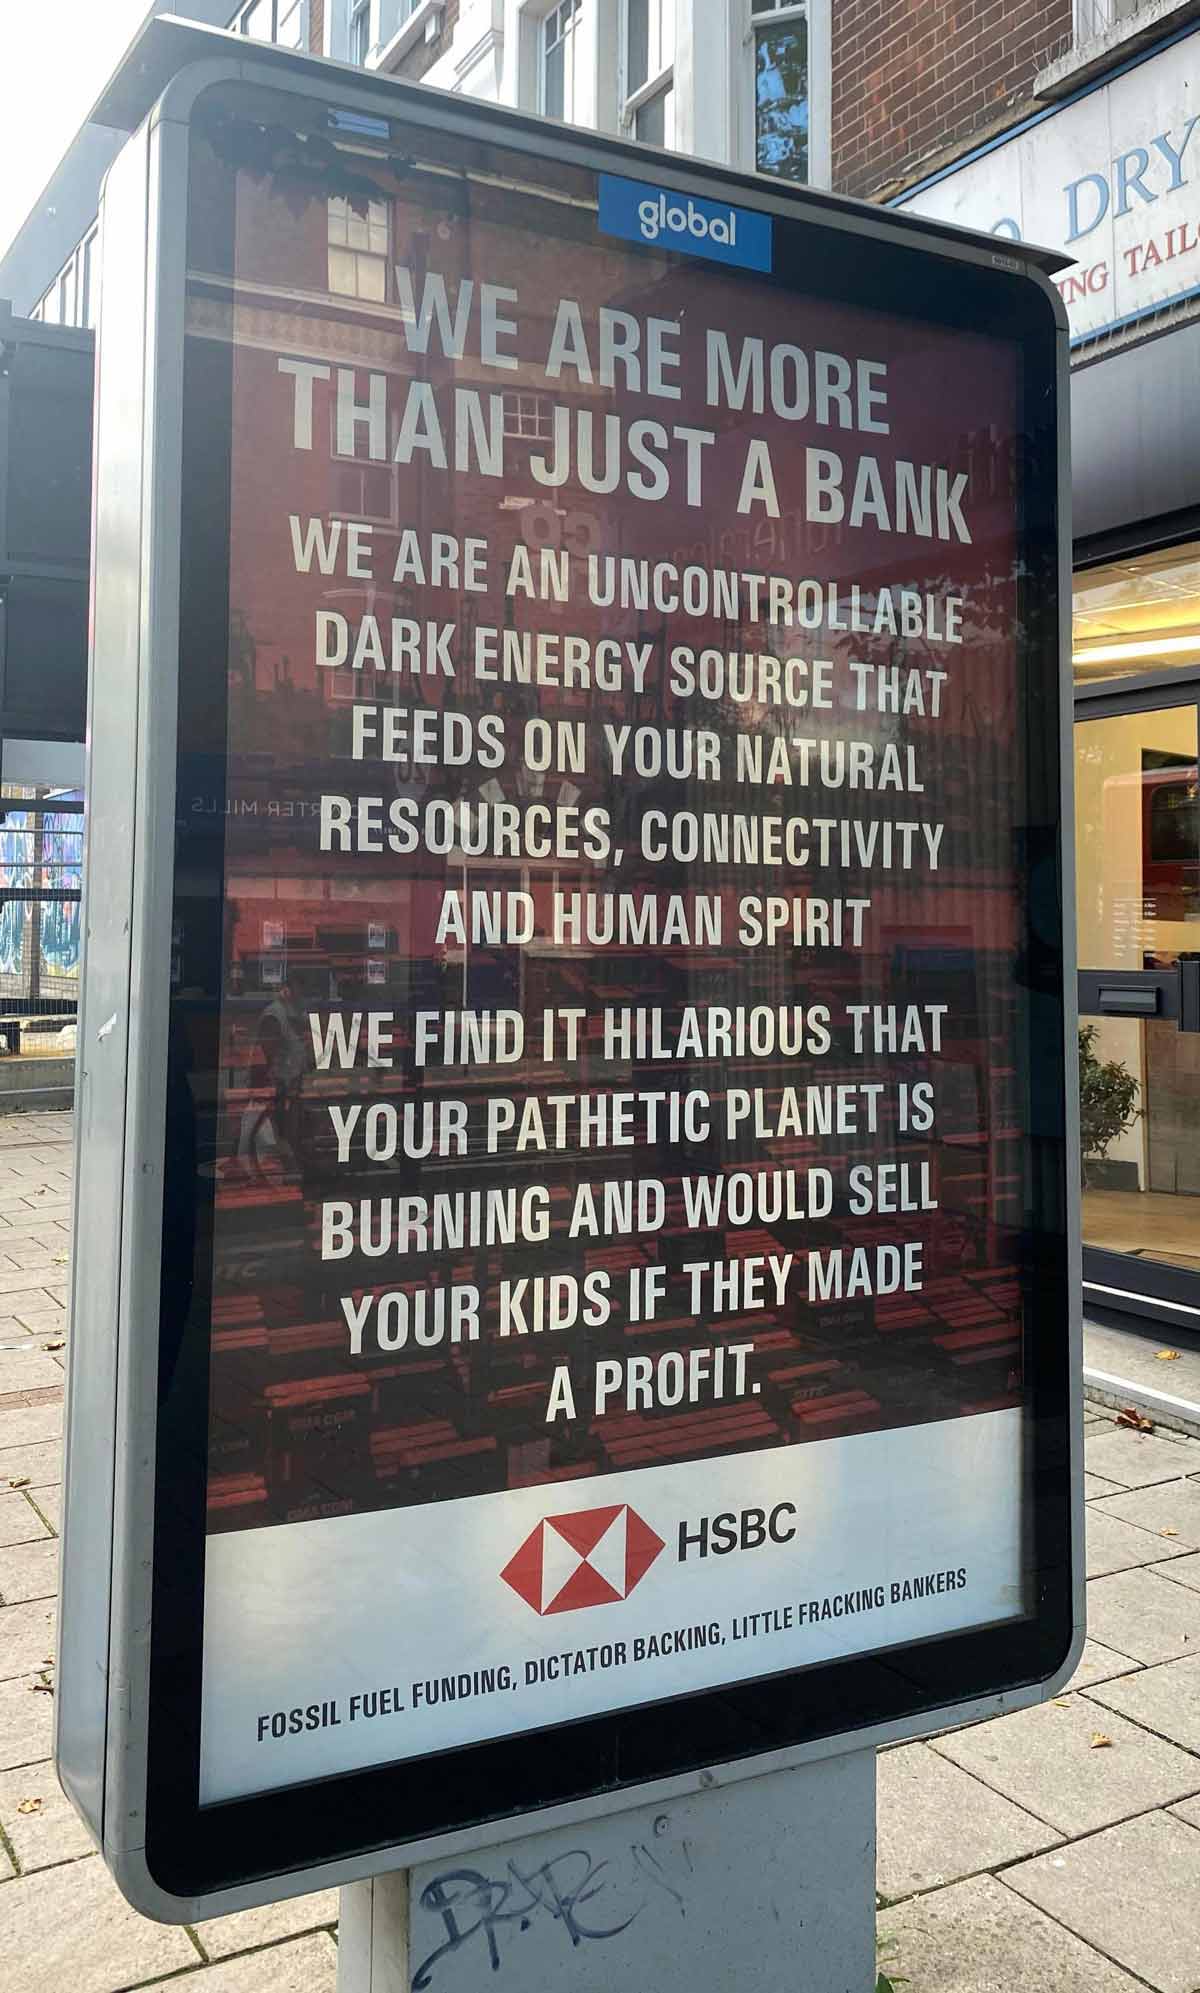 We are more than just a bank